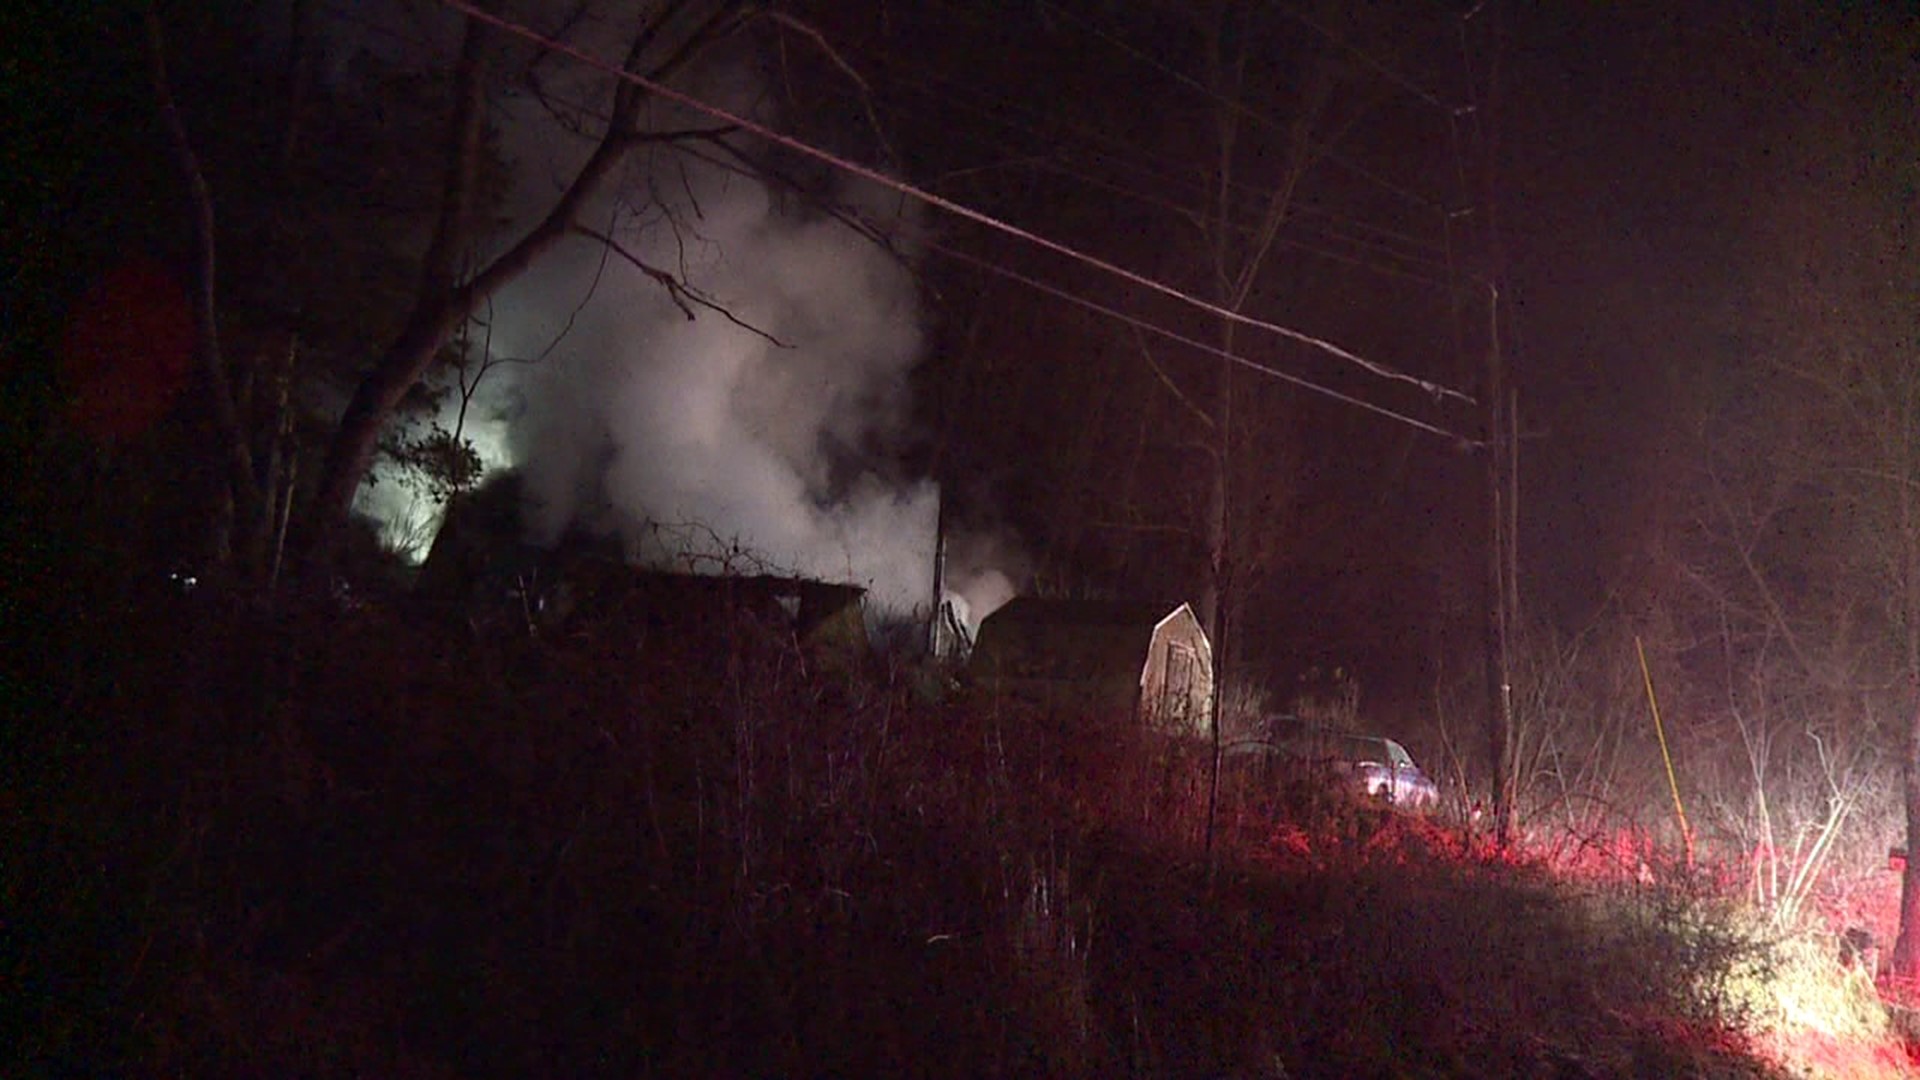 Flames broke out around 4 a.m. Sunday morning at a home along Billings Mill Road in the township.